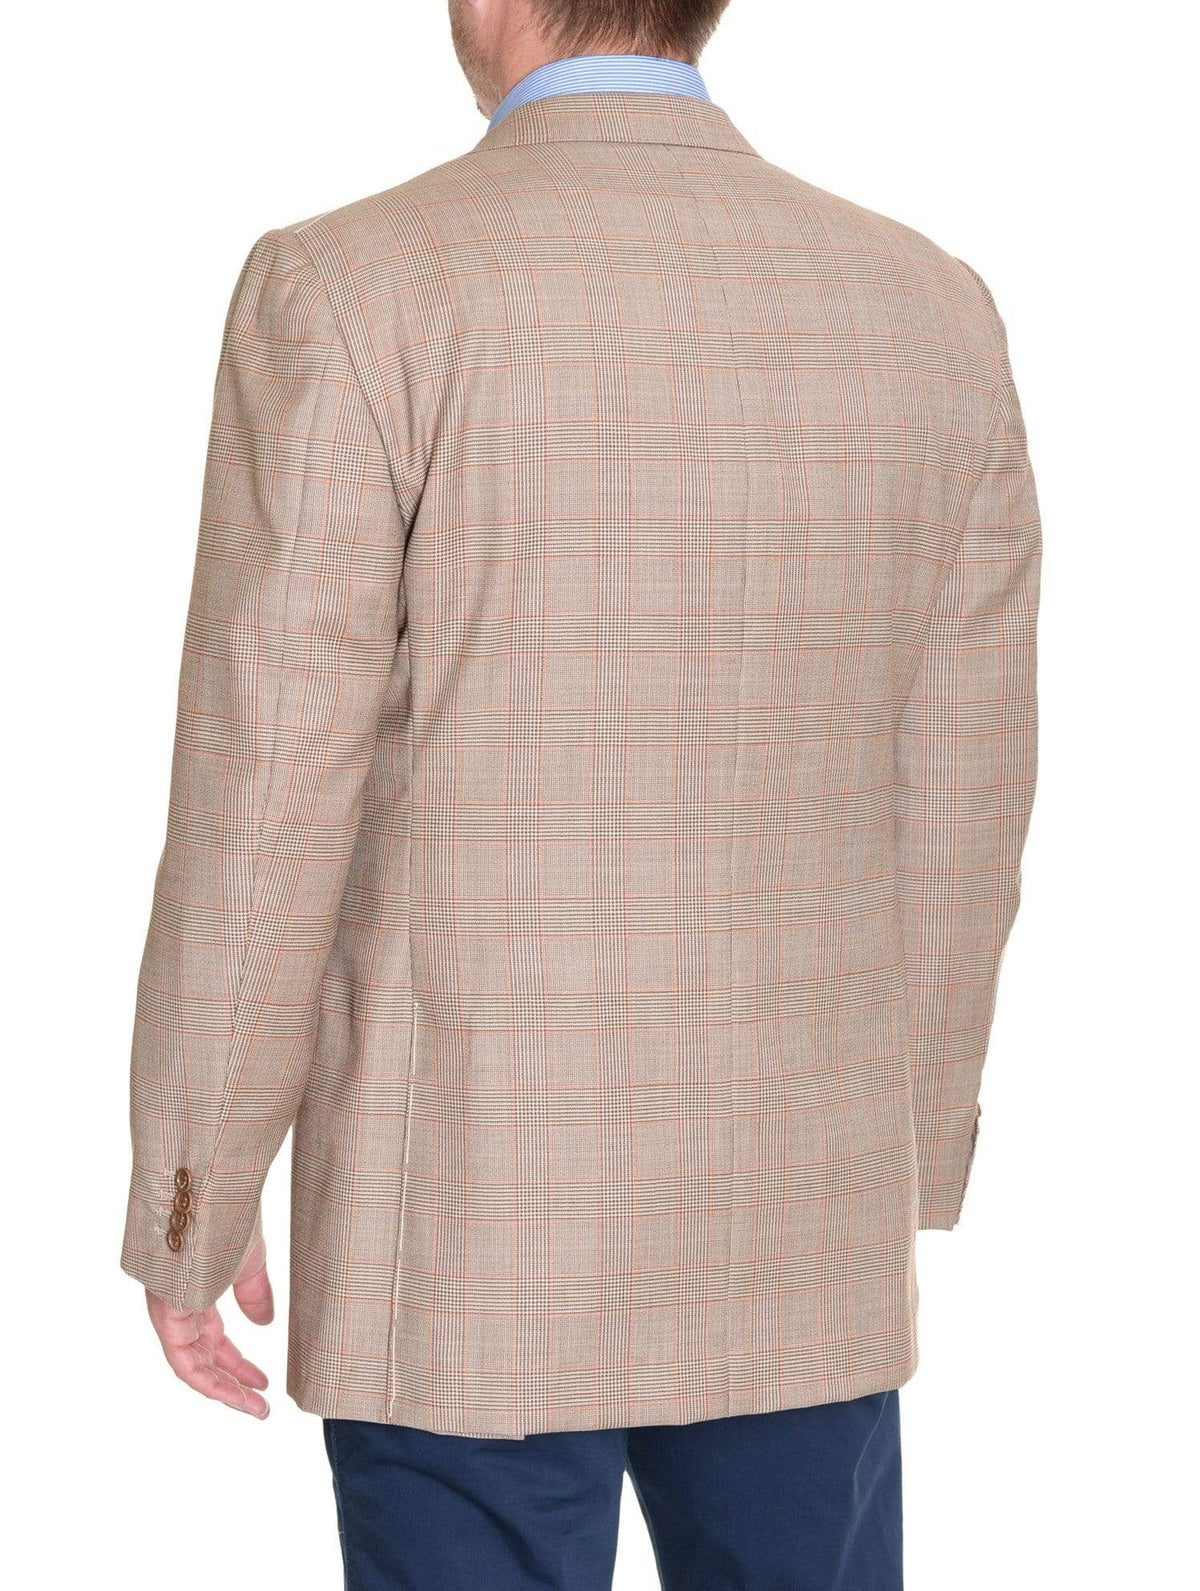 Sartoria Partenopea Italy 40R 50 Light Brown Glen Plaid Canvassed Wool Sportcoat - The Suit Depot